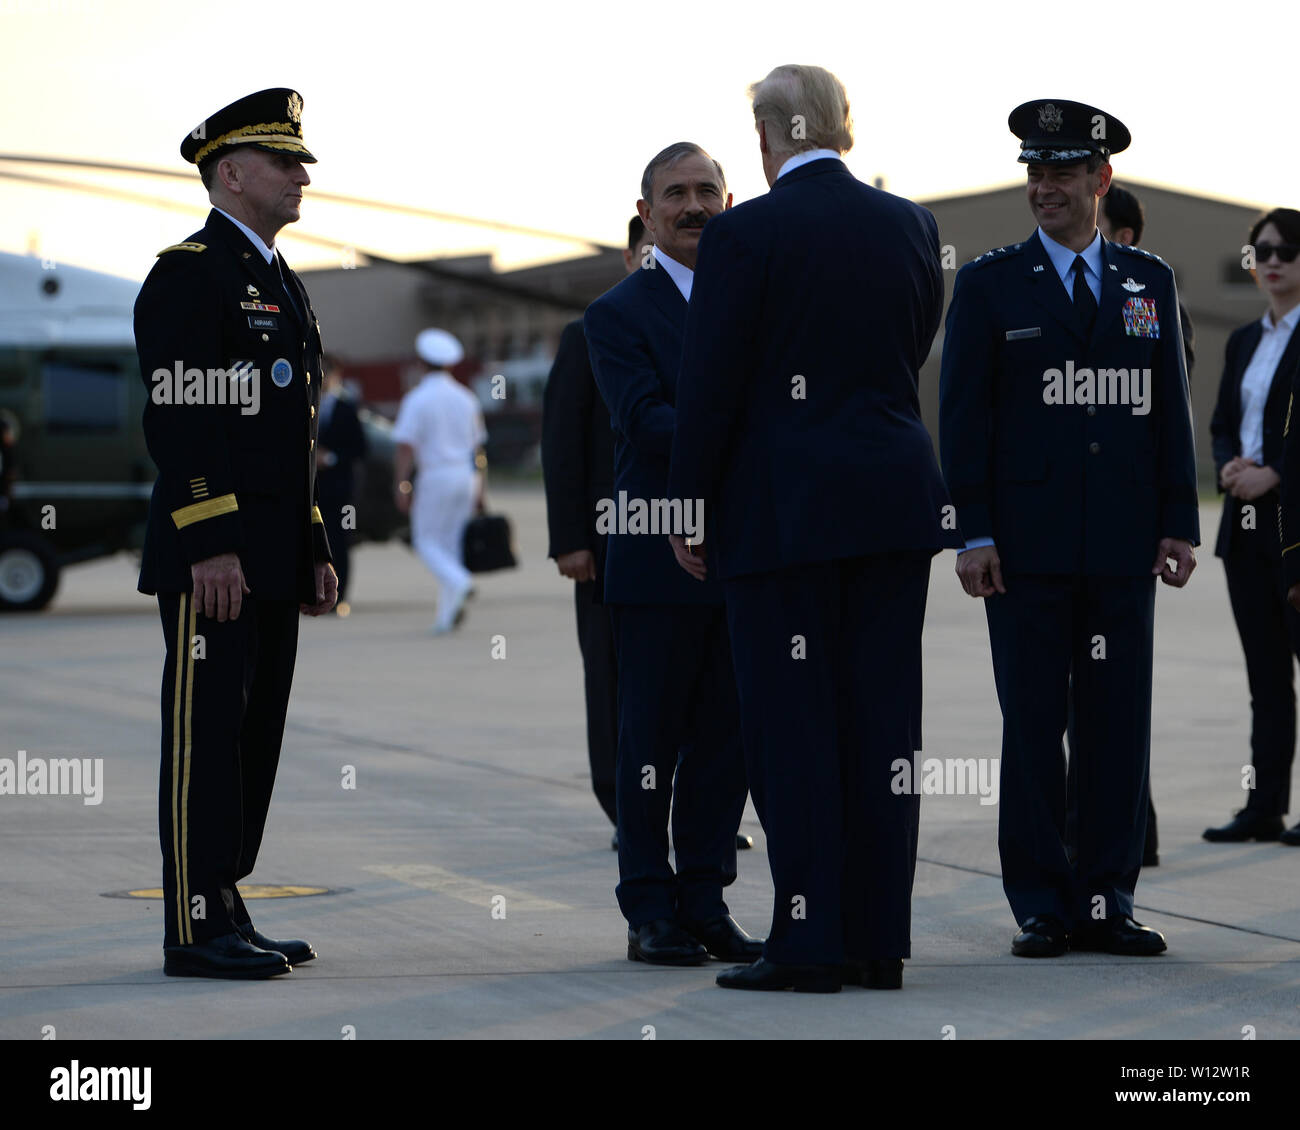 Ambassador Harry Harris, United States Embassy and Consulate in Korea, greets President Donald J. Trump, on the flightline at Osan Air Base, Republic of Korea, June 29, 2019. The U.S. State Department and the Department of Defense work closely together on the peninsula in support of long-term stability in the Indo-Pacific region.  (U.S. Air Force photo by Staff Sgt. Sergio A. Gamboa) Stock Photo